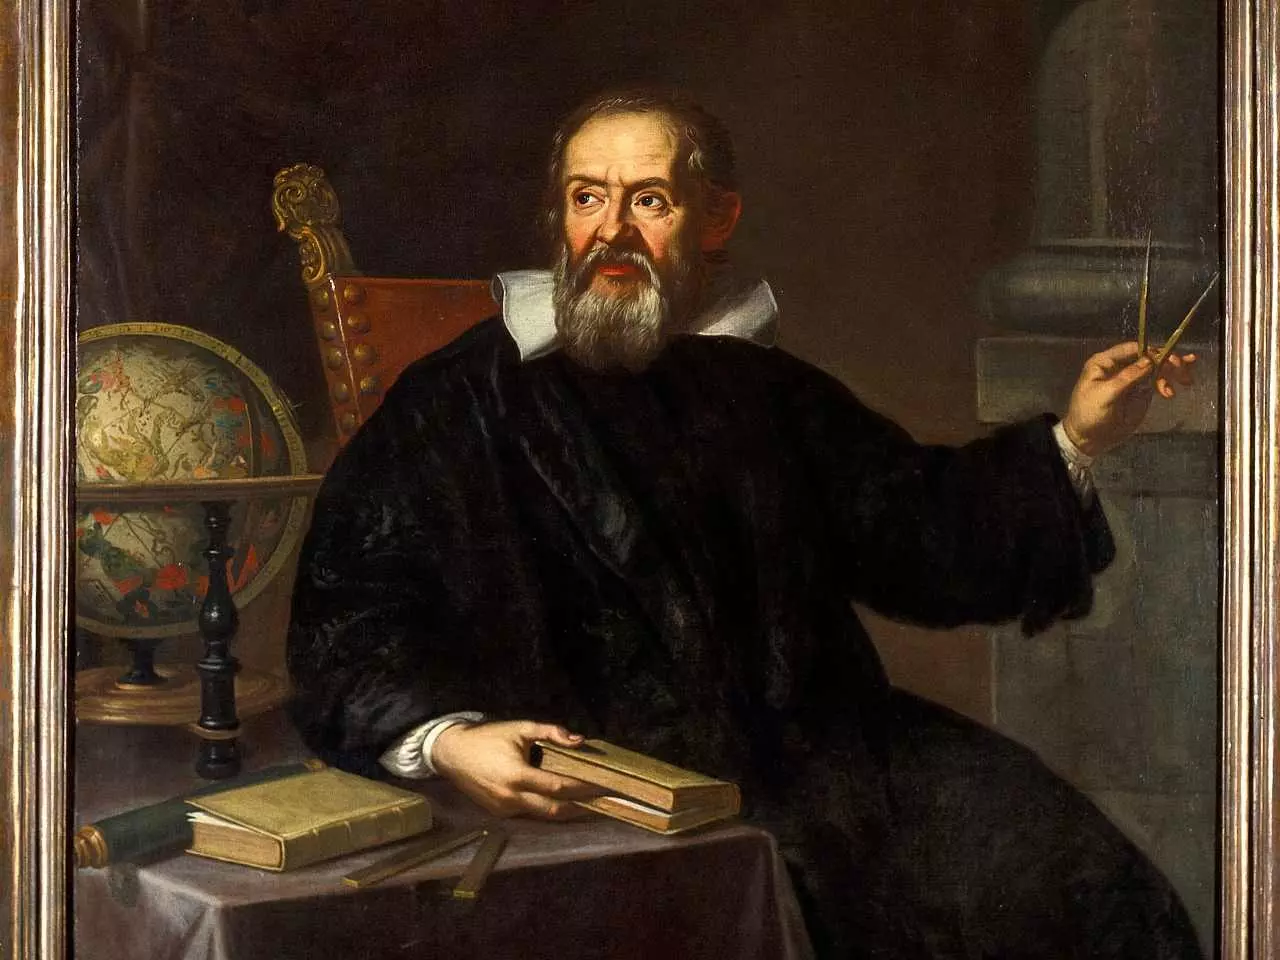 who was galileo galilei and why is galileo known as the father of modern observational astronomy